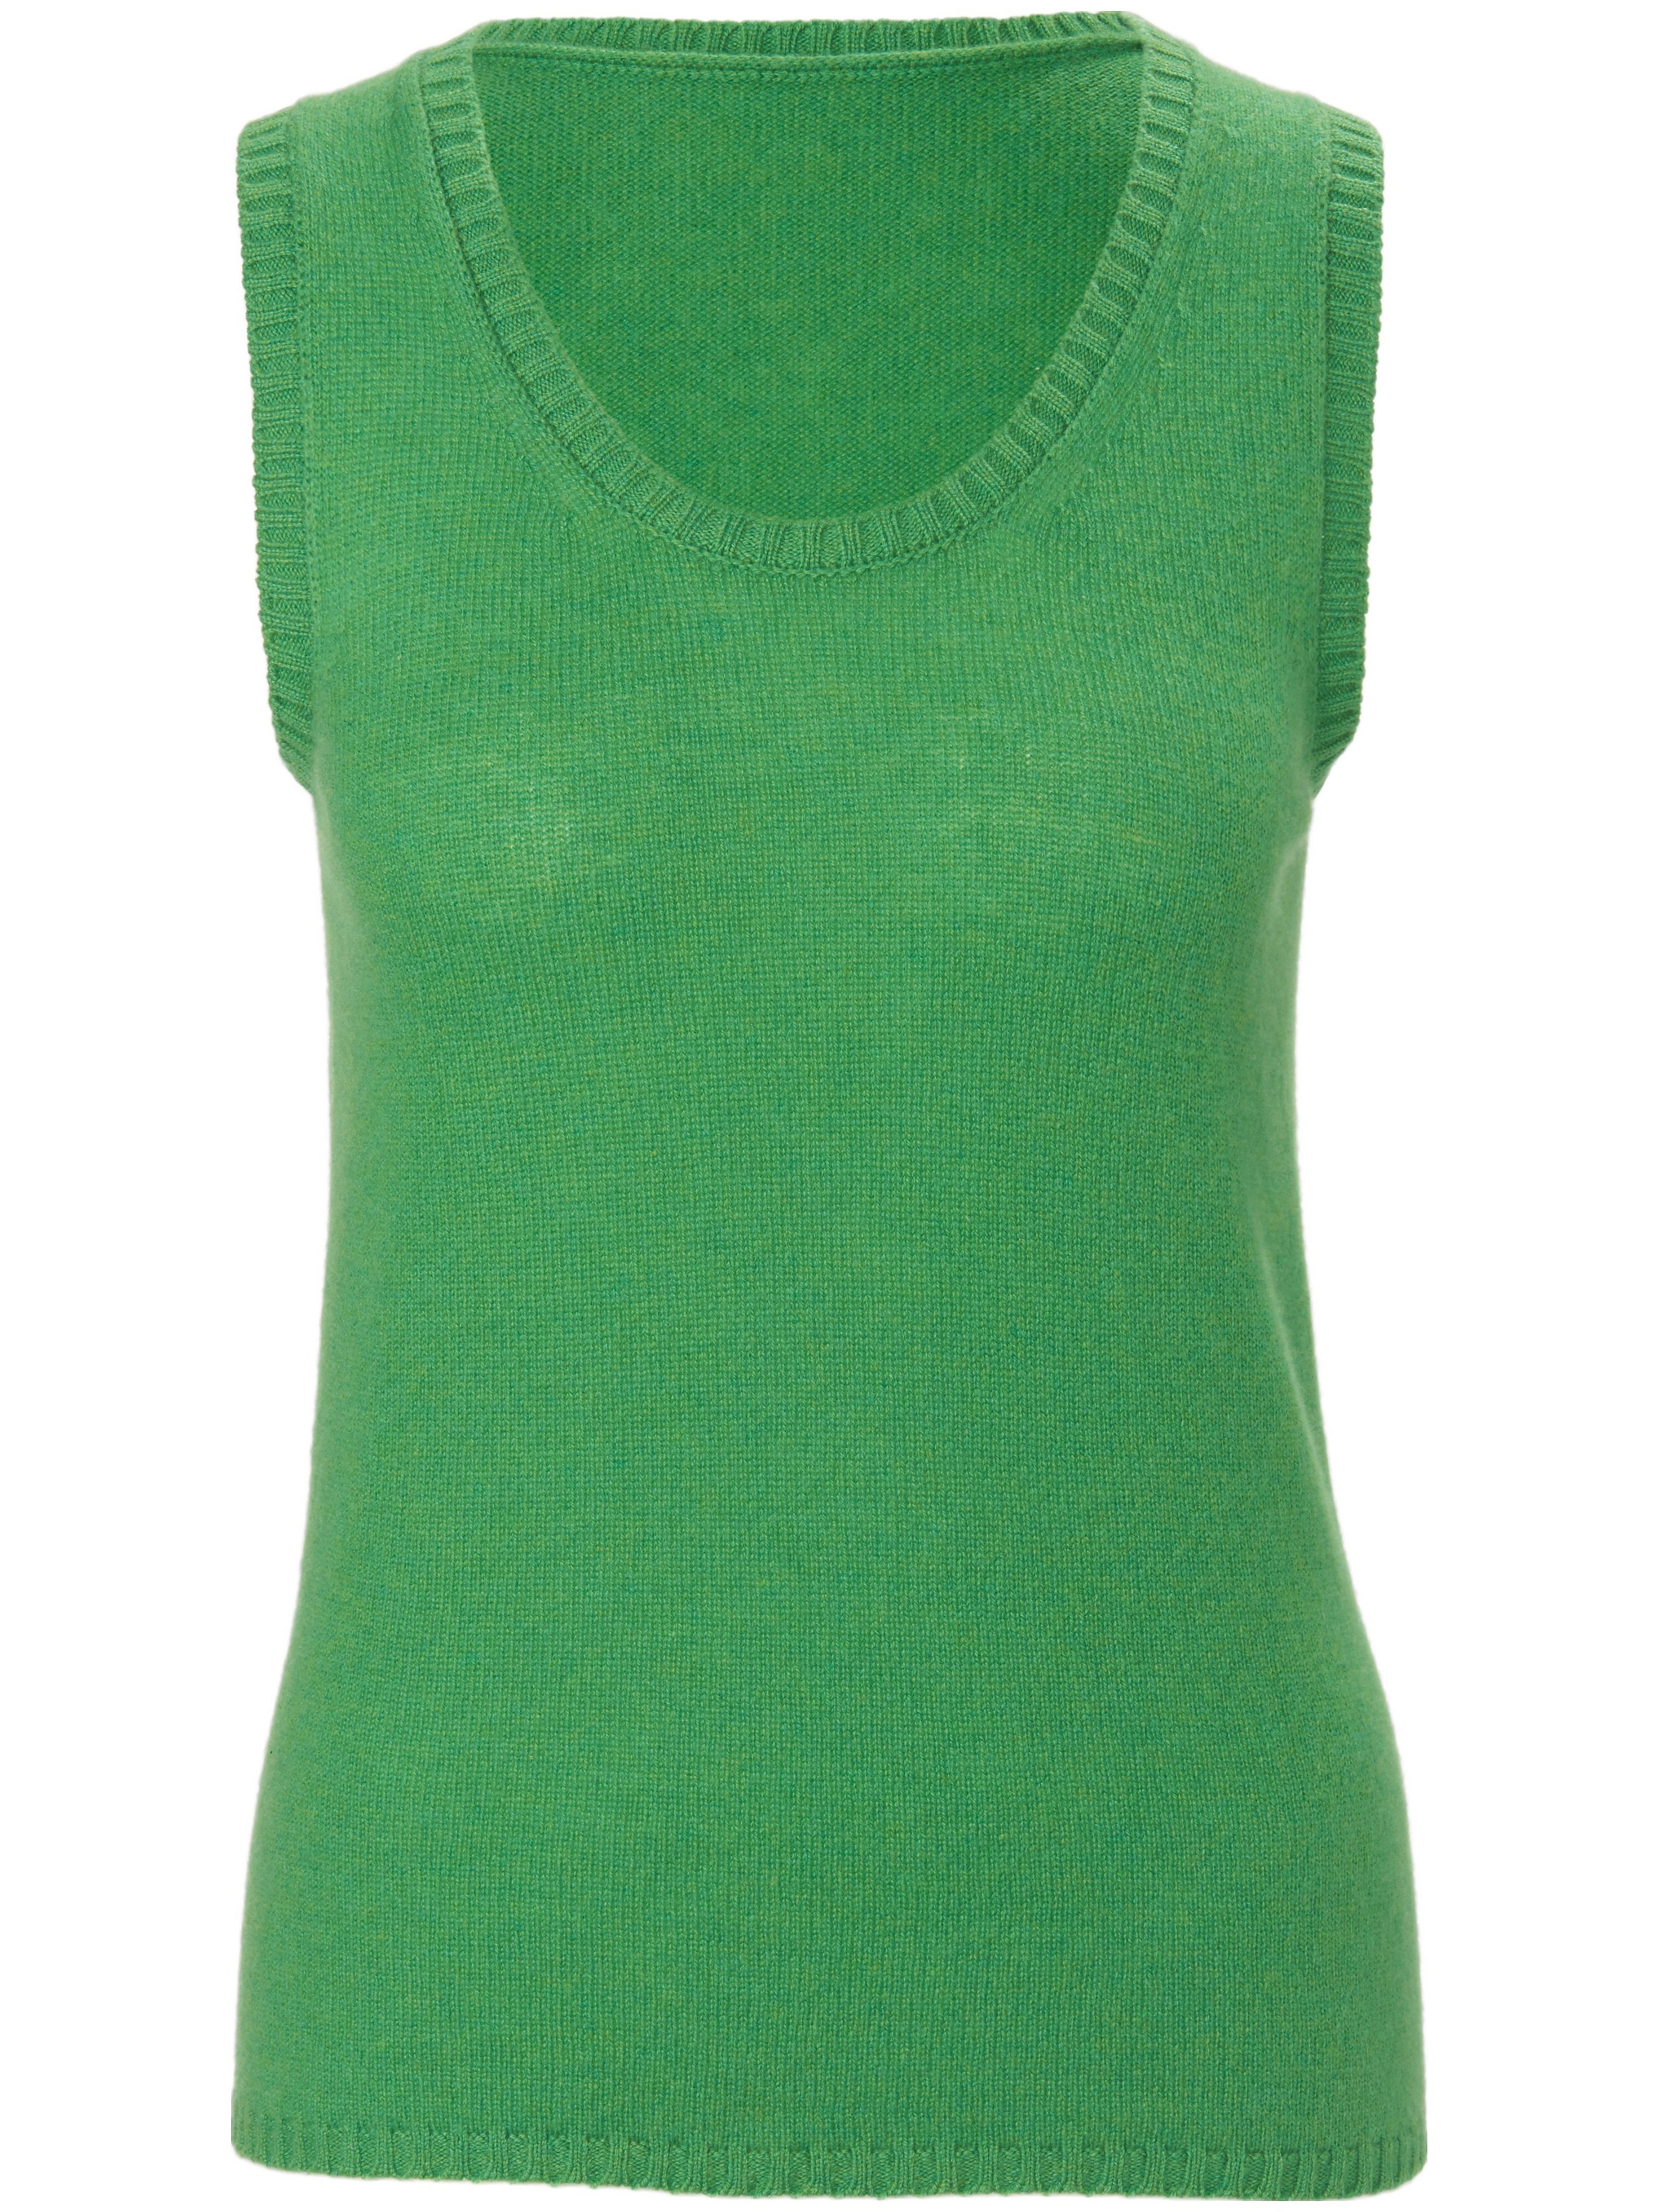 Le top maille 100% cachemire  Fadenmeister Berlin vert taille 42